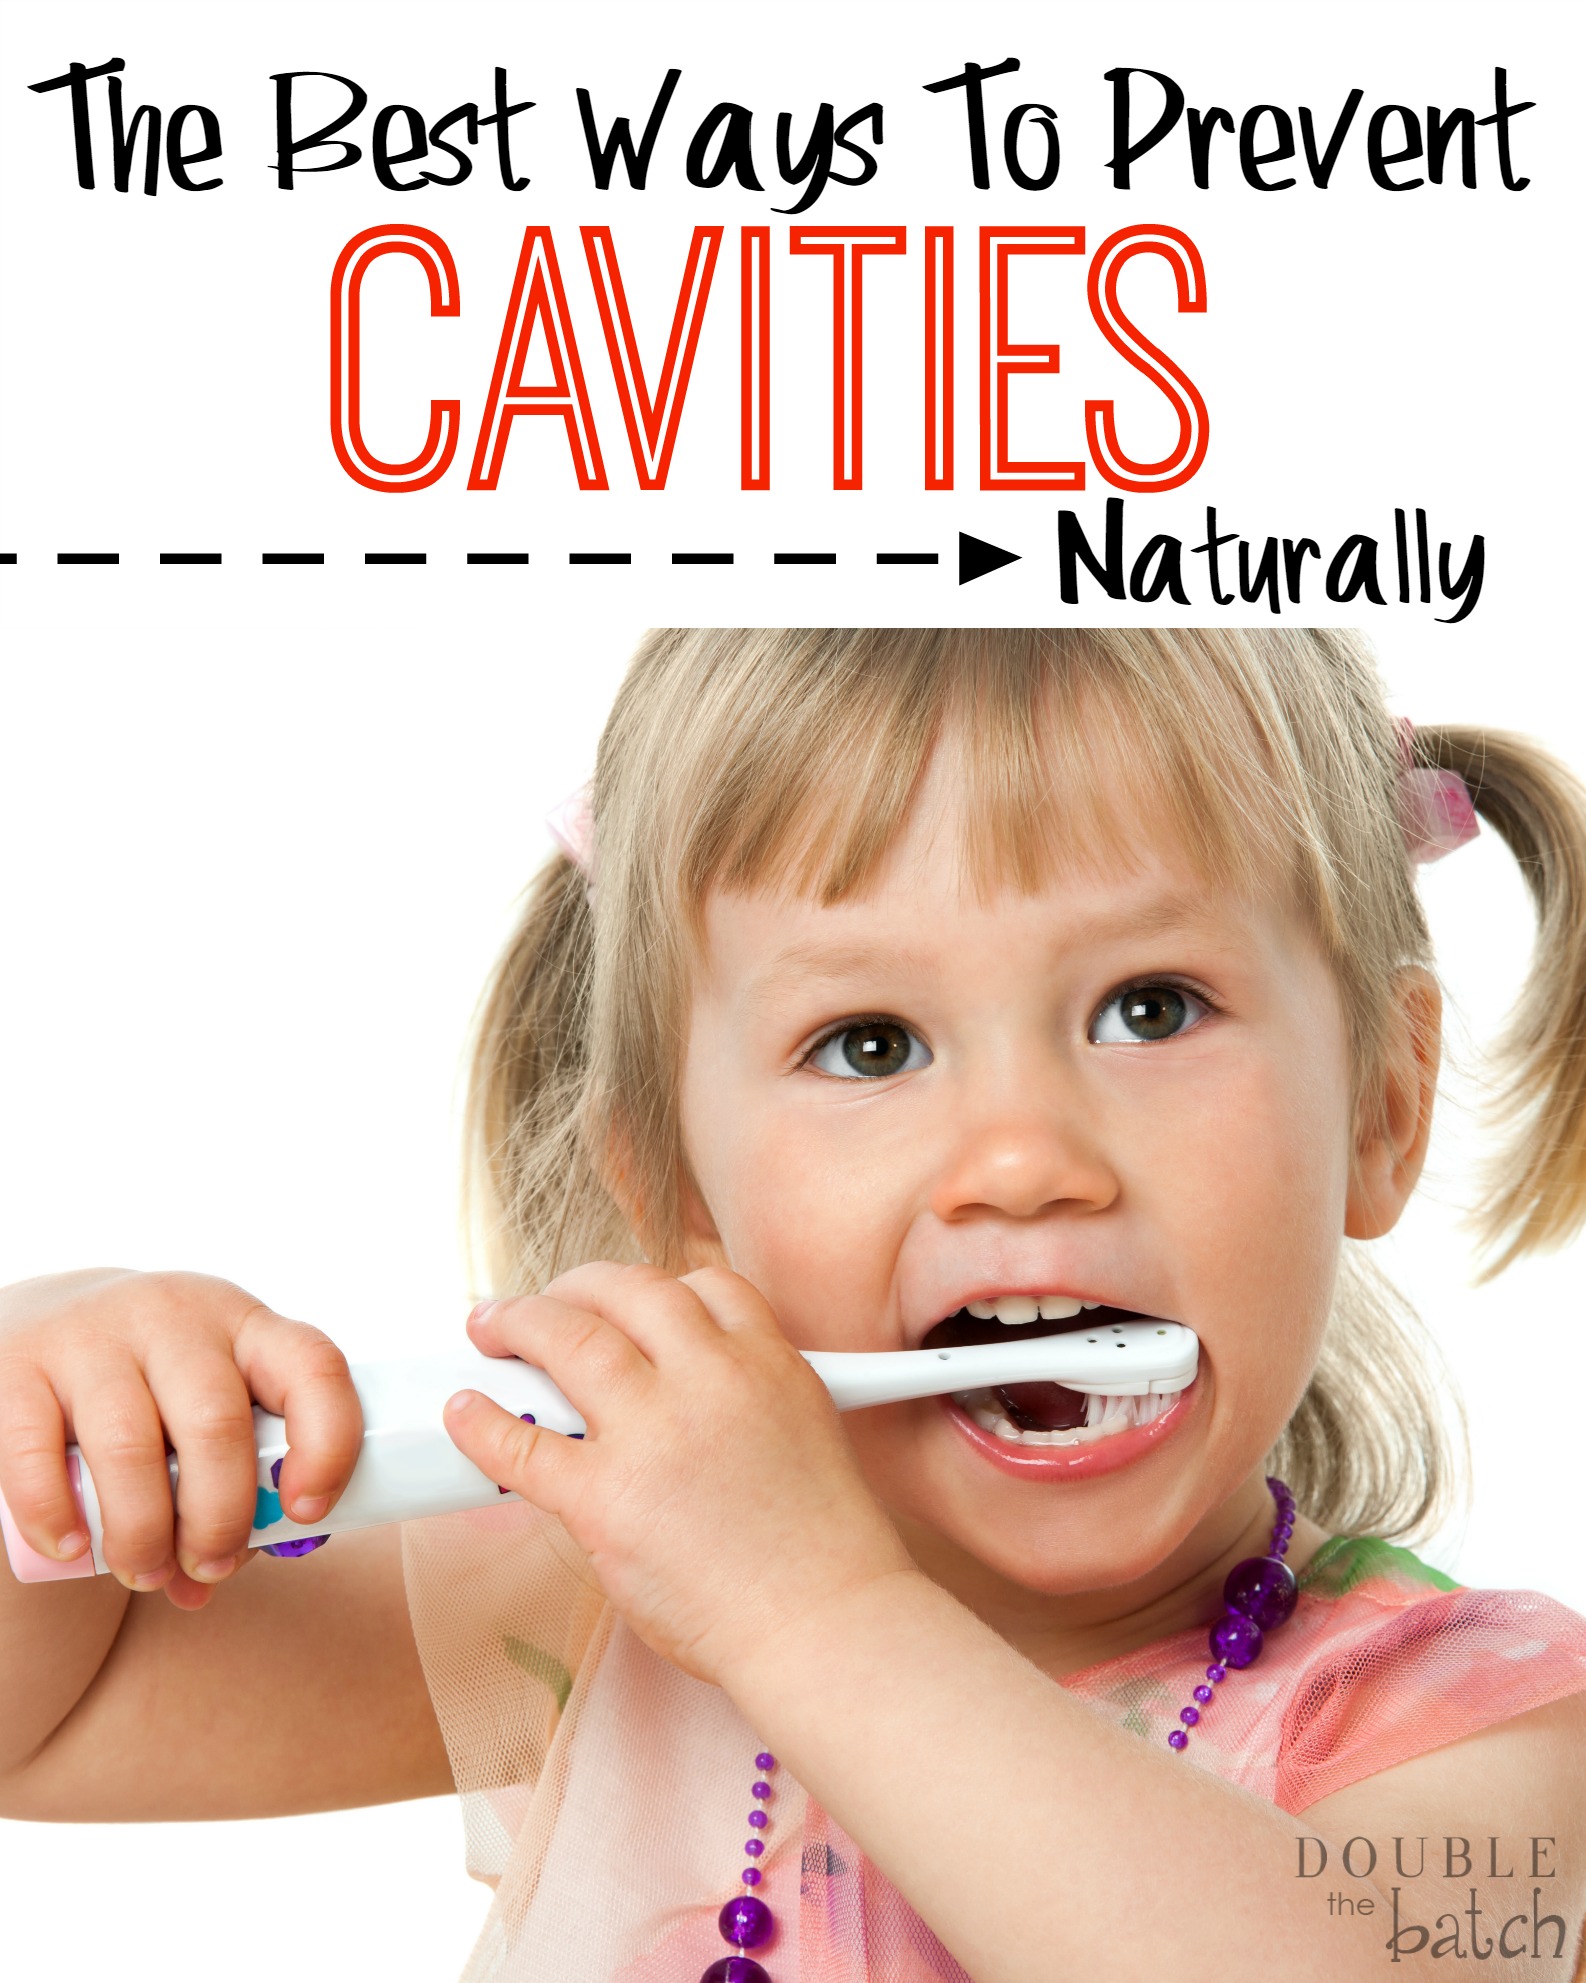 The Best Natural Ways to Prevent Cavities! So tired of that junk I buy at the store.